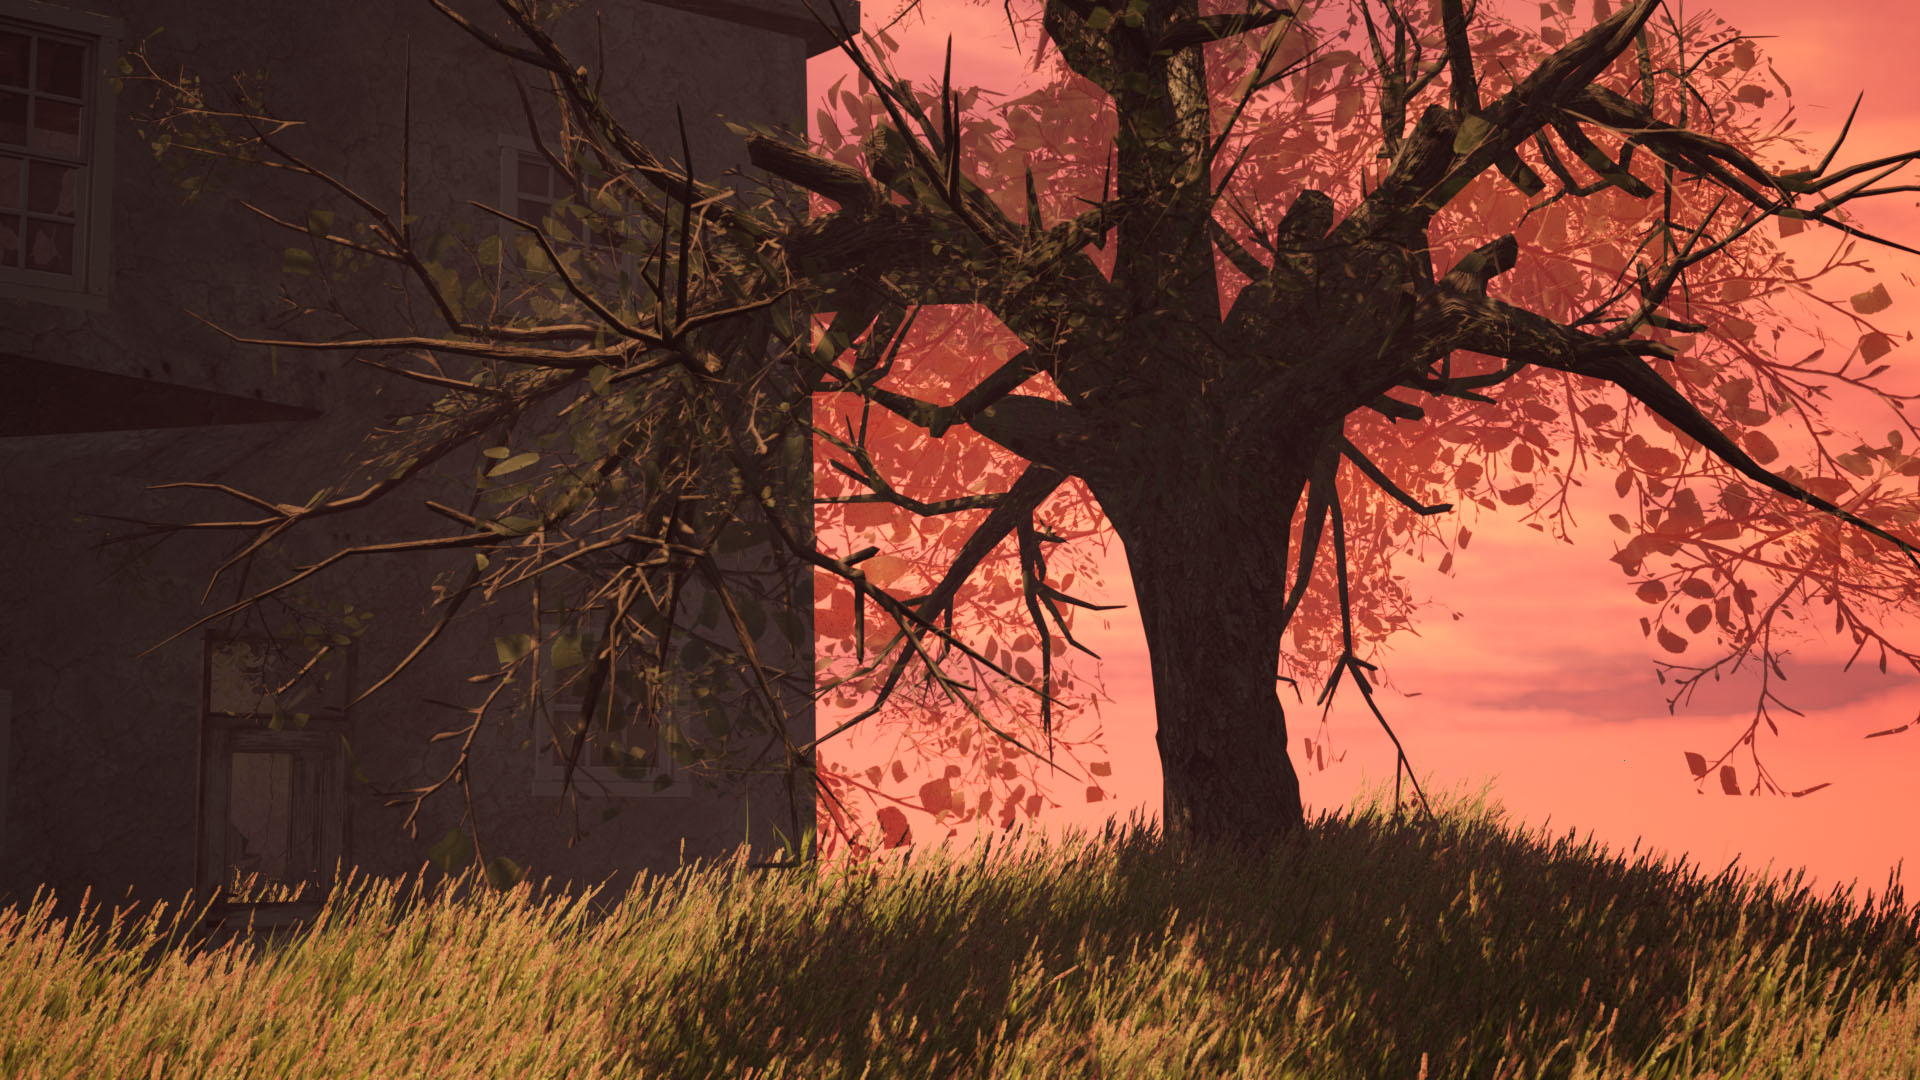 Screenshot from the game showing a serene landscape of a house, trees, and grassy fields against a the pink sky.